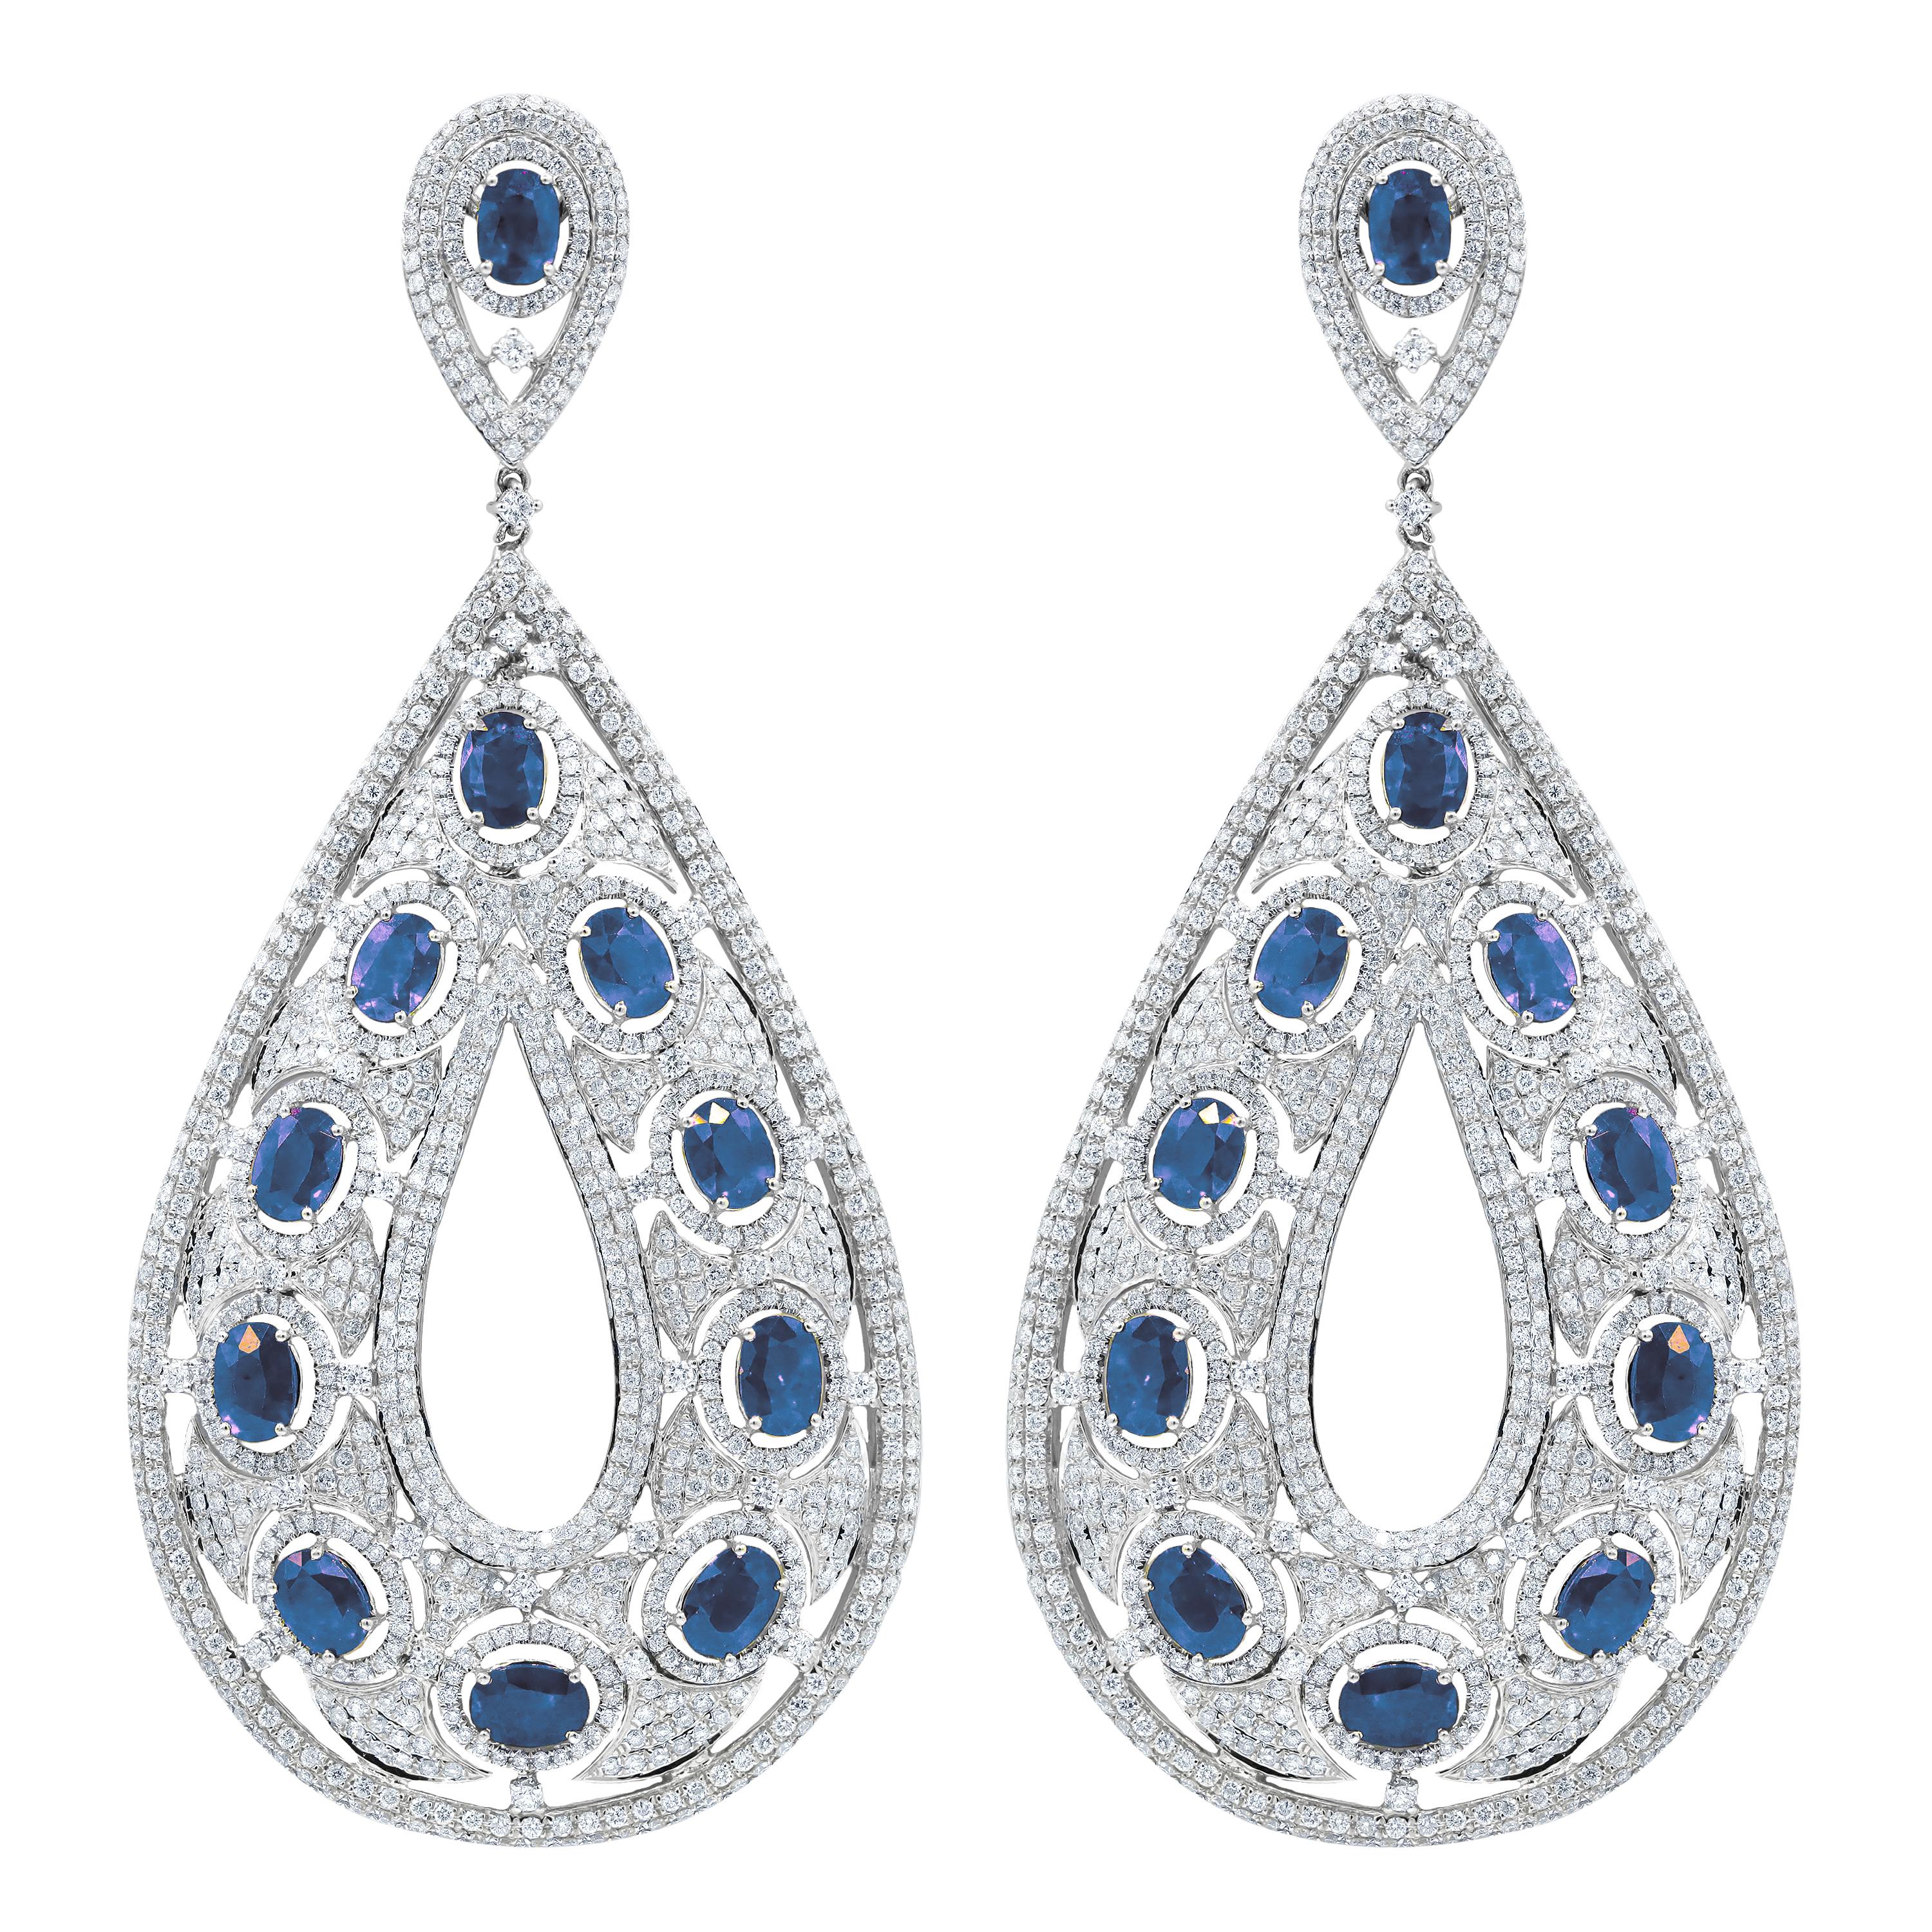 18 kt white gold diamond earrings with a teardrop design containing 25.00 cts tw of tanzanites and 14.80 cts tw of white diamonds 
Diana M. has been a leading supplier of top-quality fine jewelry for over 35 years.
Diana M is a one-stop shop for all